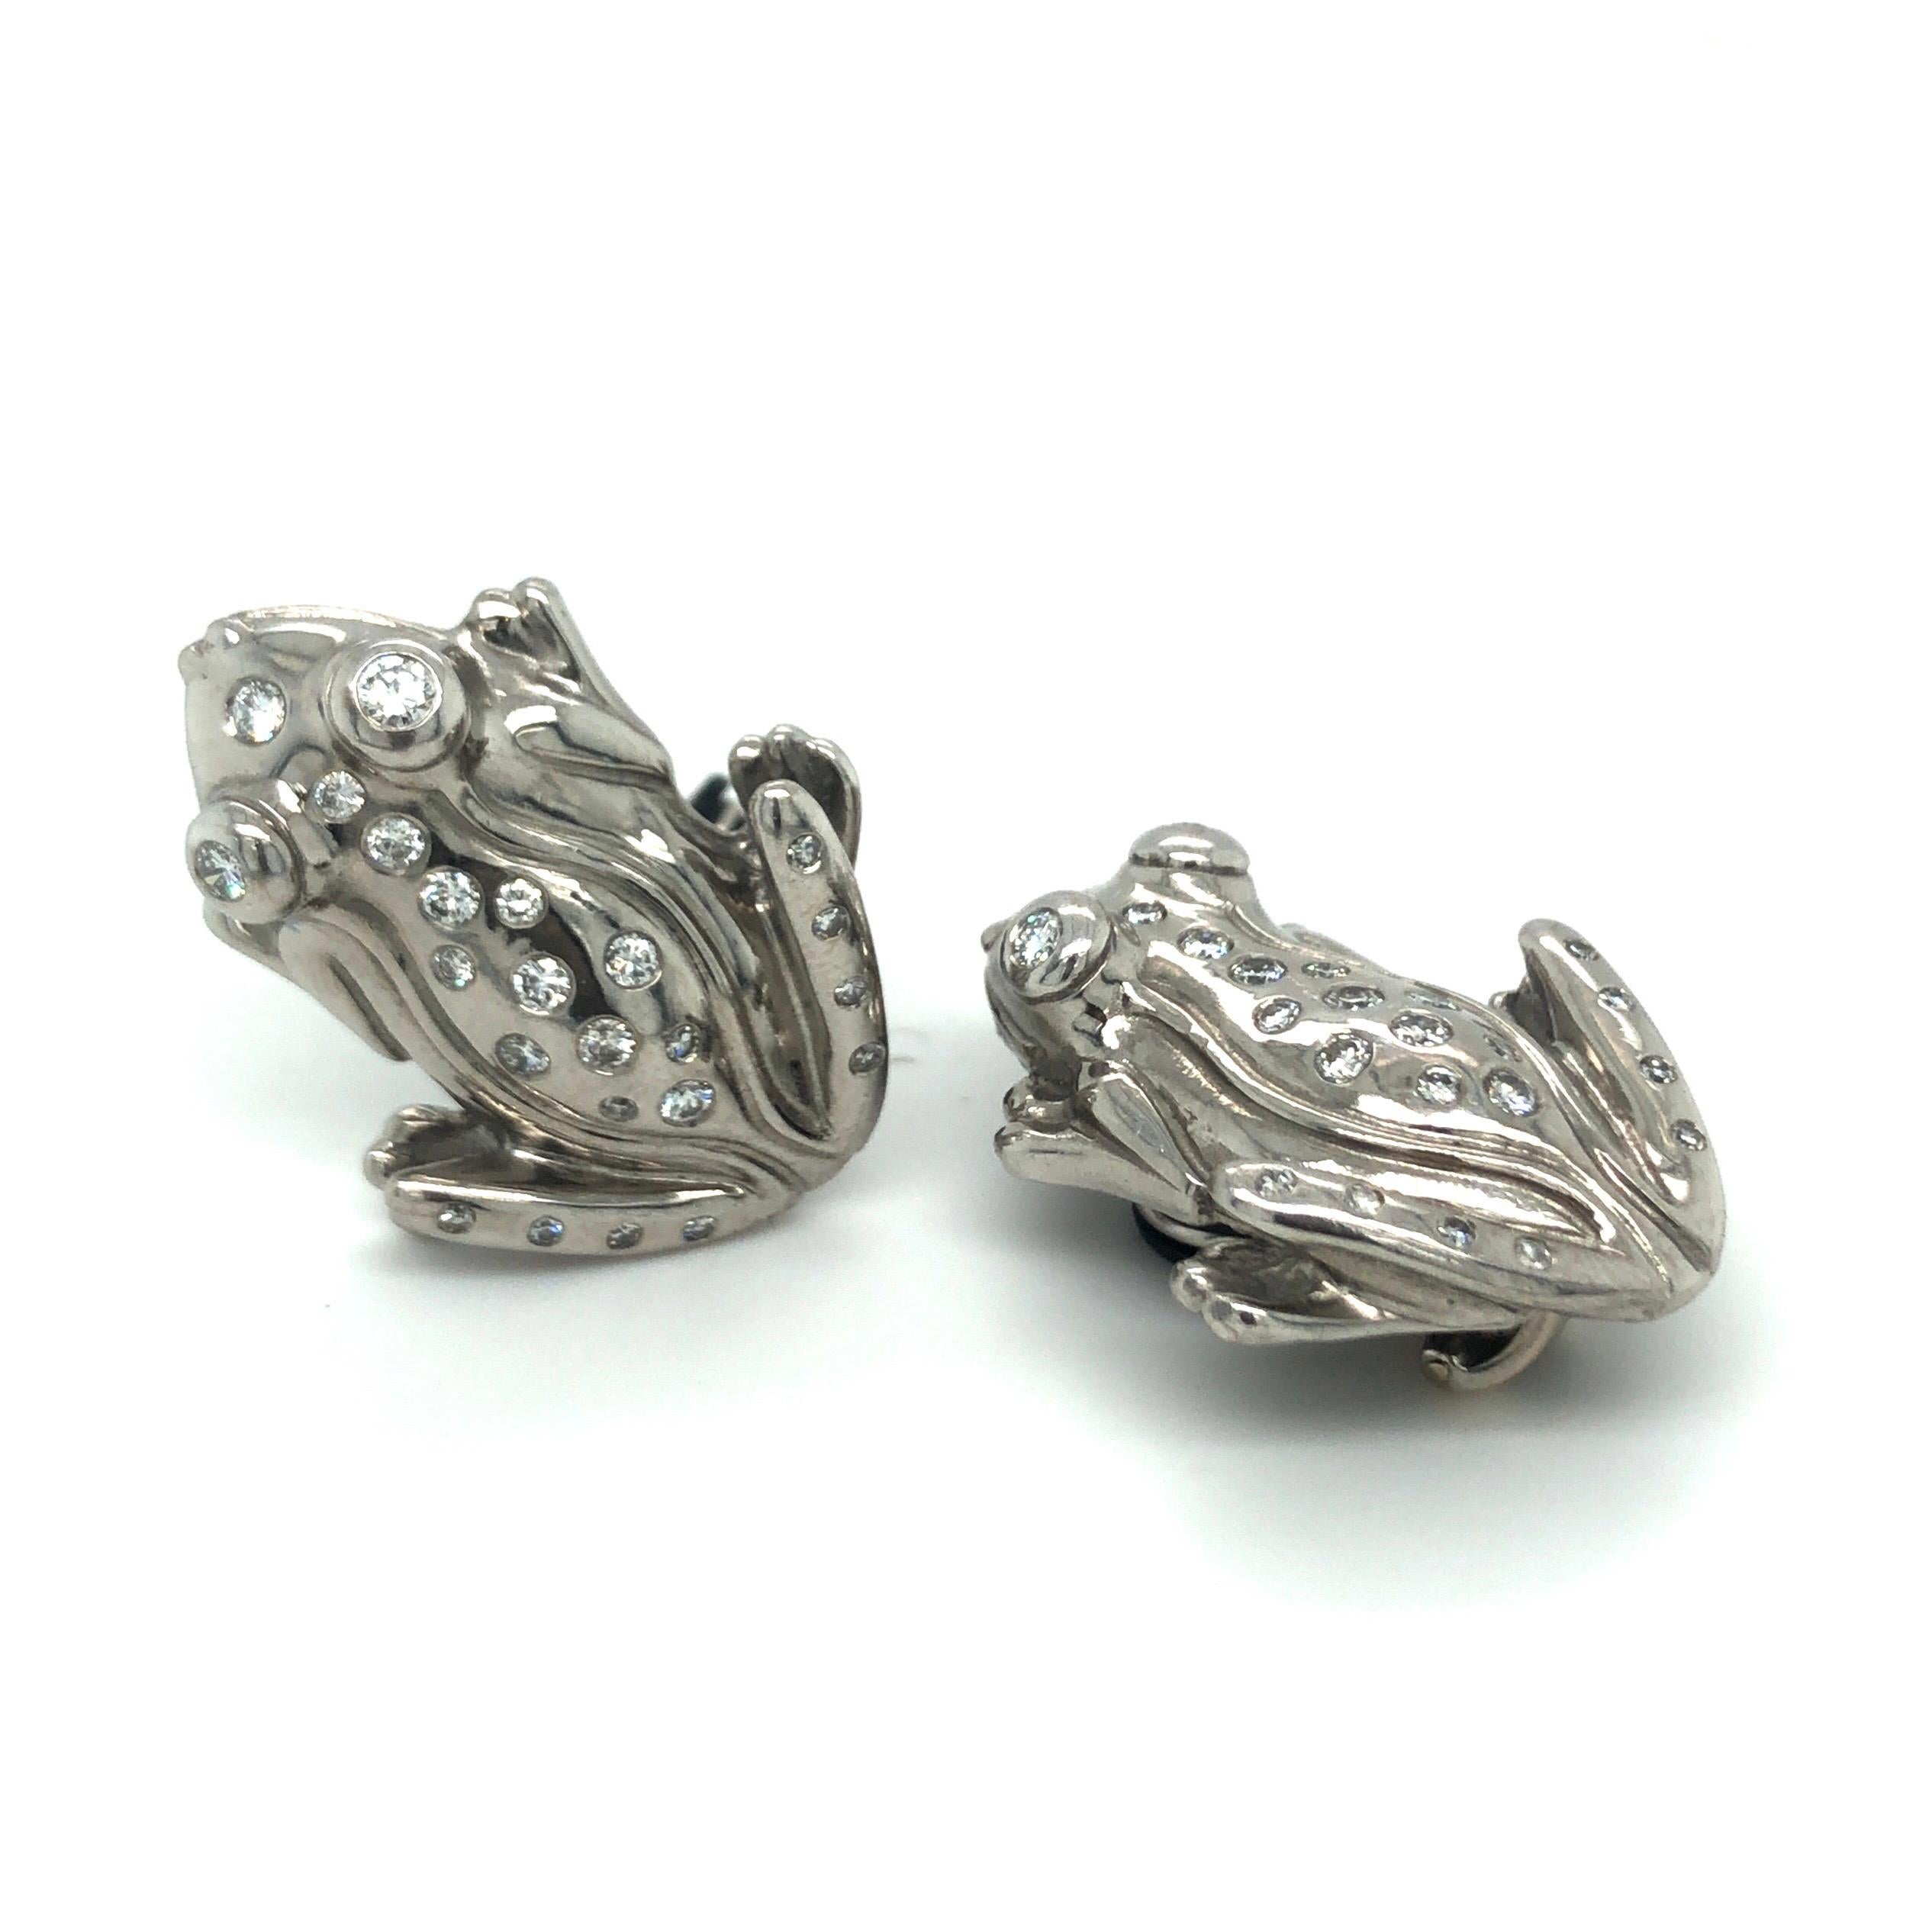 Absolutely eye-catching 18 karat white gold and diamond clip-on earrings depicting a pair of frogs.
These lovely earclips are entirely crafted in 18 karat white gold and set with 46 brilliant-cut diamonds of various sizes totalling circa 1.2